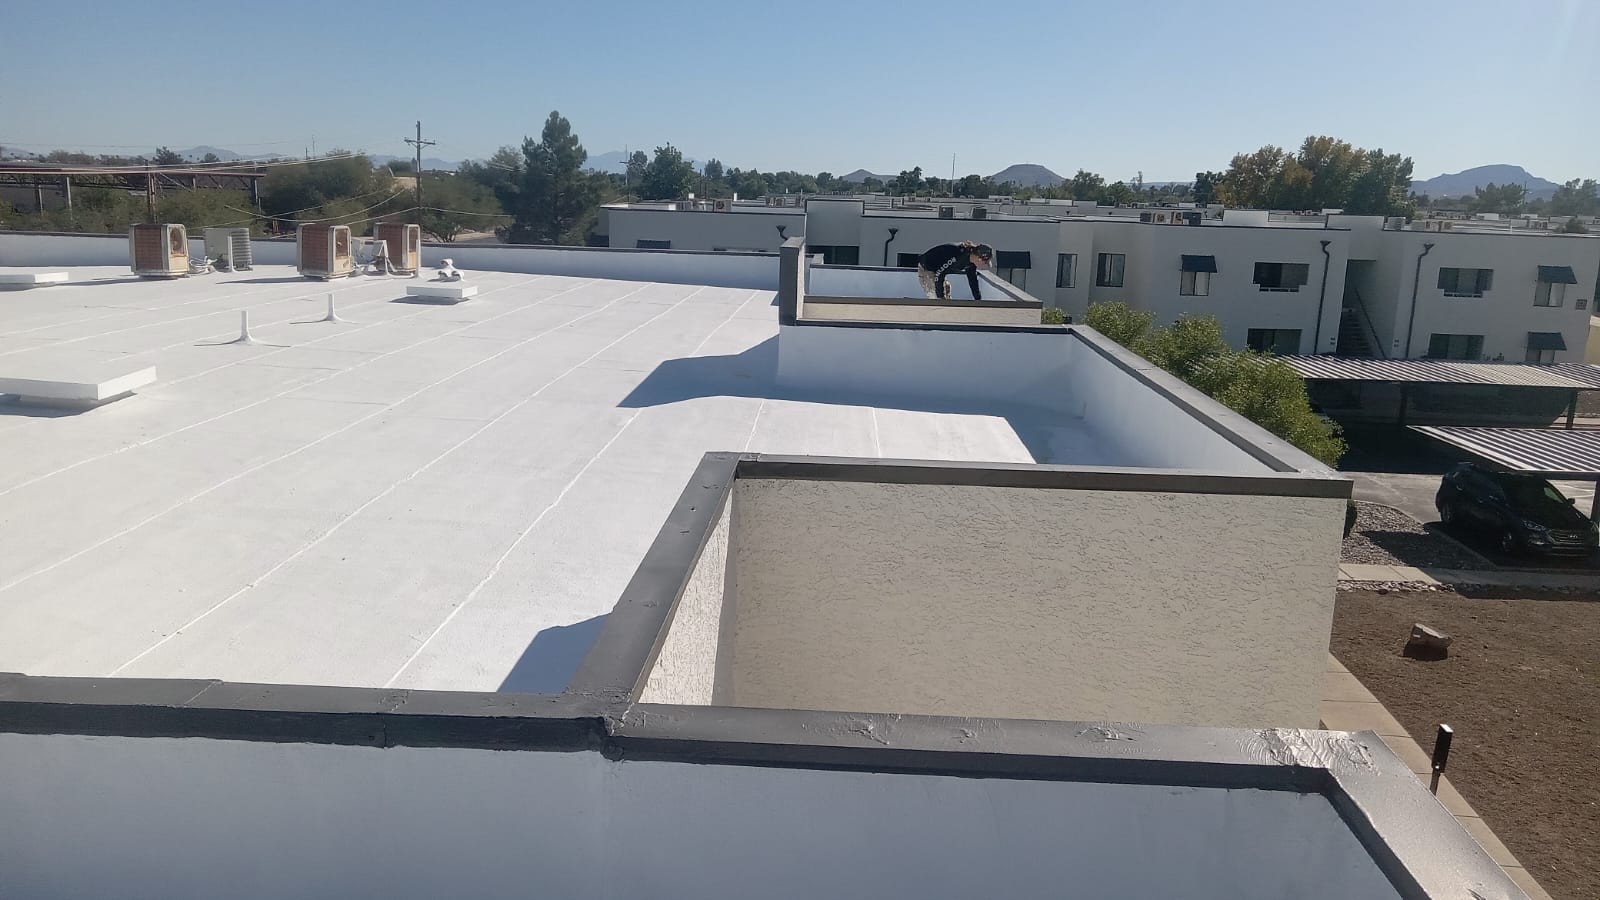 Biltmore area rooftop bathed in sunlight, featuring a durable and reflective spray foam coating.